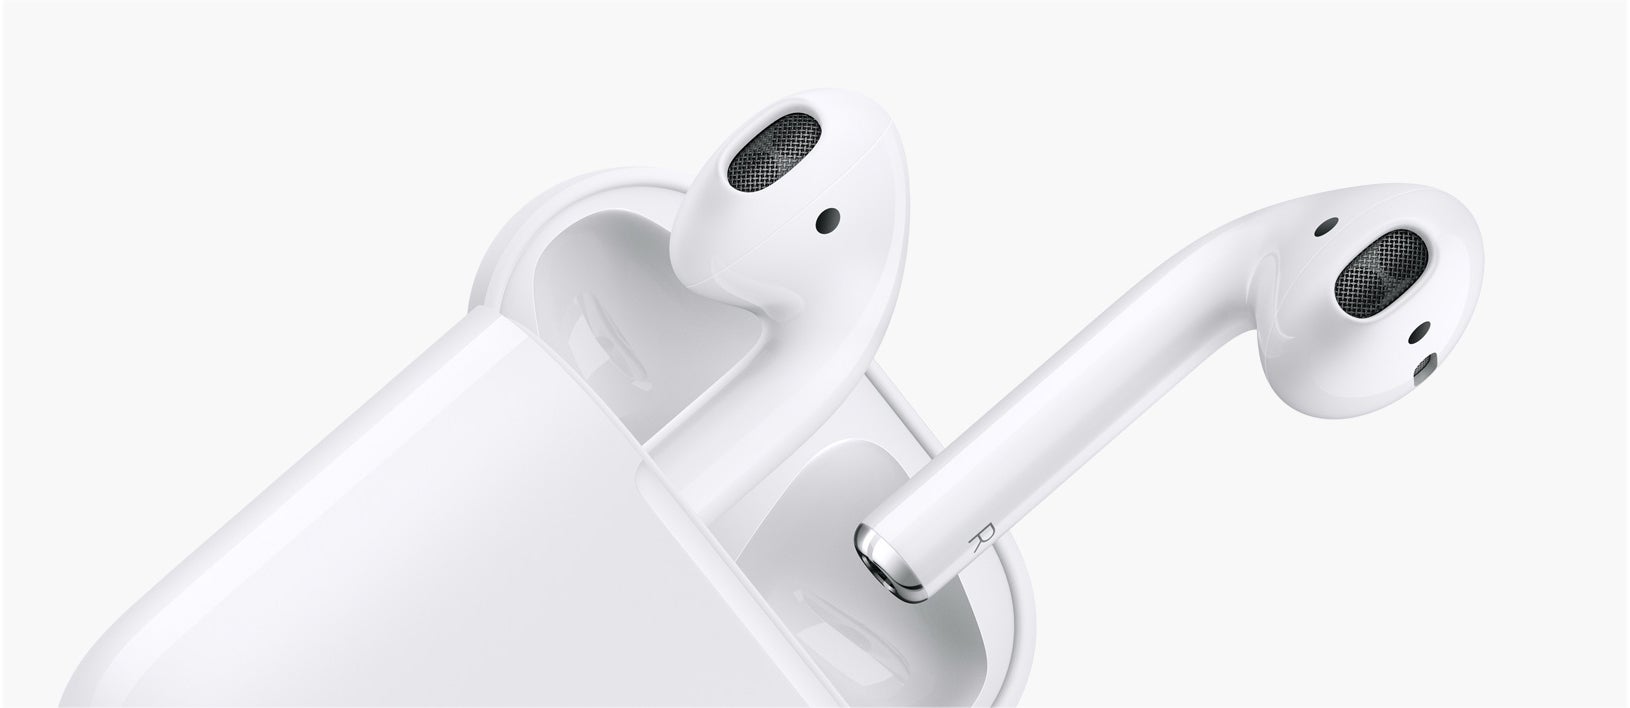 An authorized seller of Apple products says that AirPods will be available sometime in December